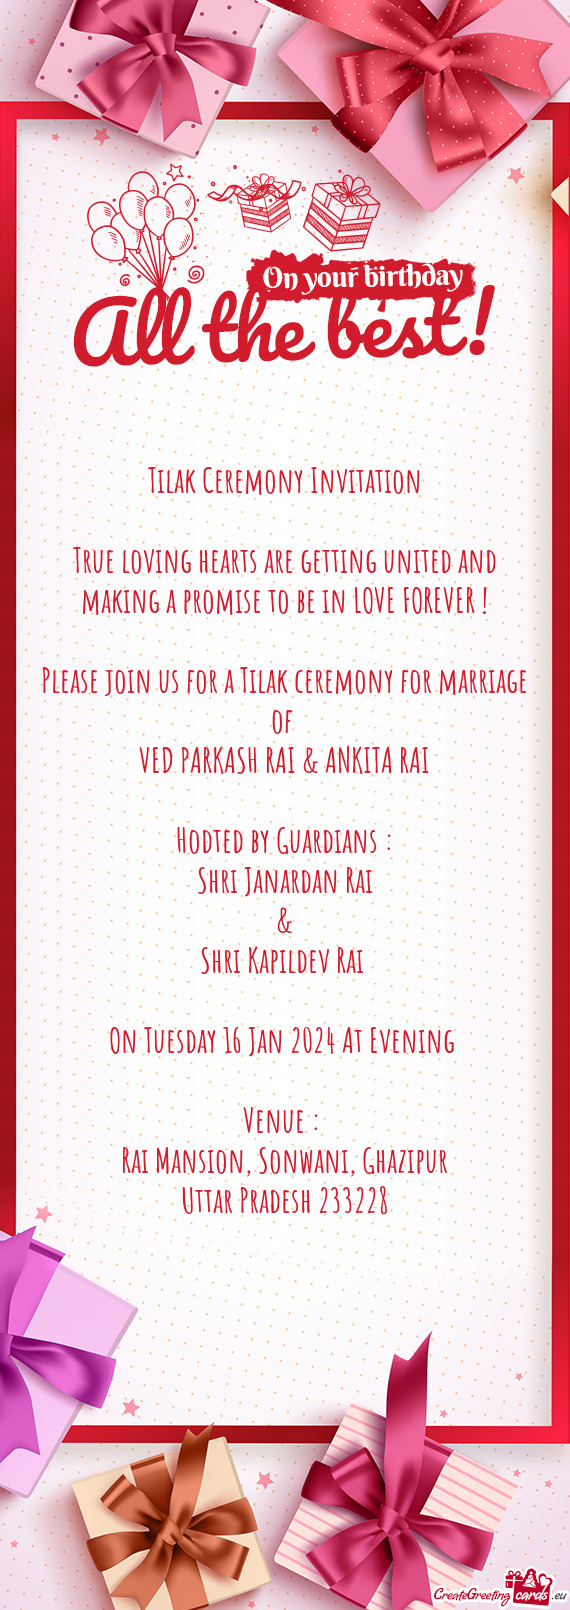 Please join us for a Tilak ceremony for marriage of